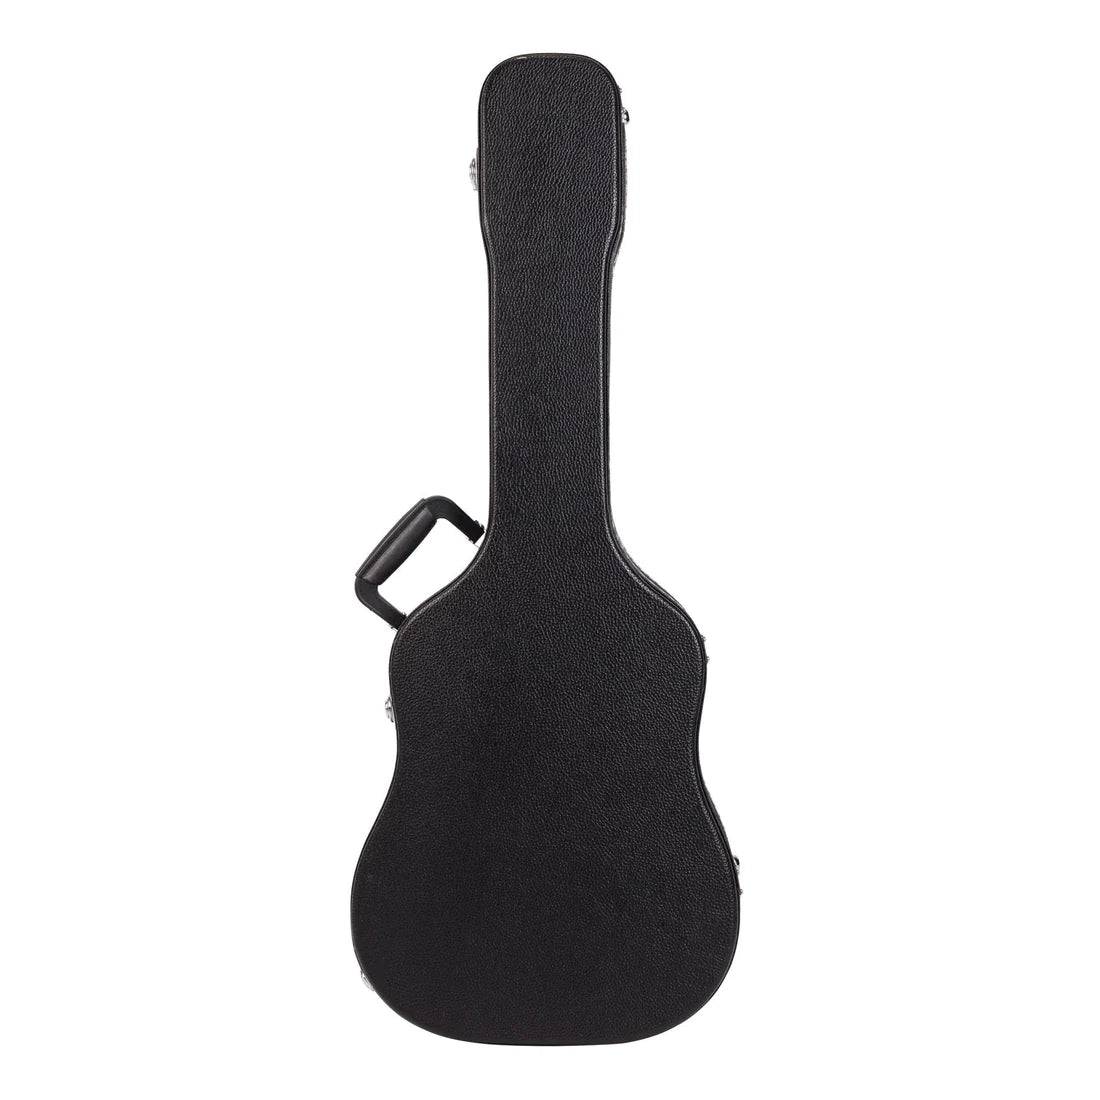 CROSSFIRE SHAPED TRAVELLER SIZED ACOUSTIC GUITAR HARD CASE - Joondalup Music Centre